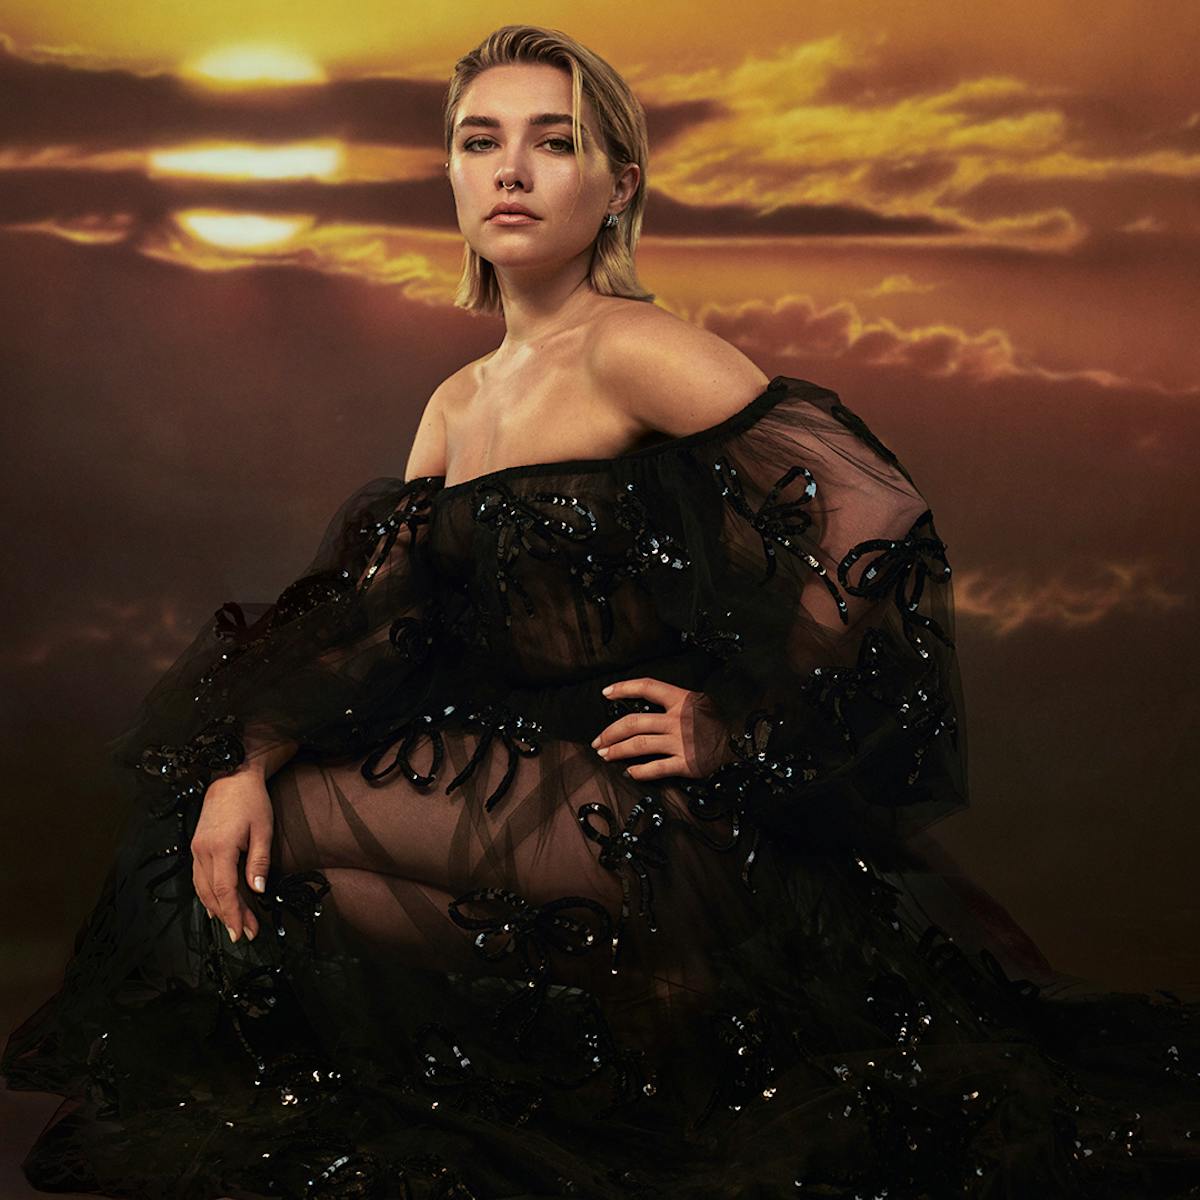 Florence Pugh wears a black sequin sheer dress and stands in front of a a bright yellow sun.